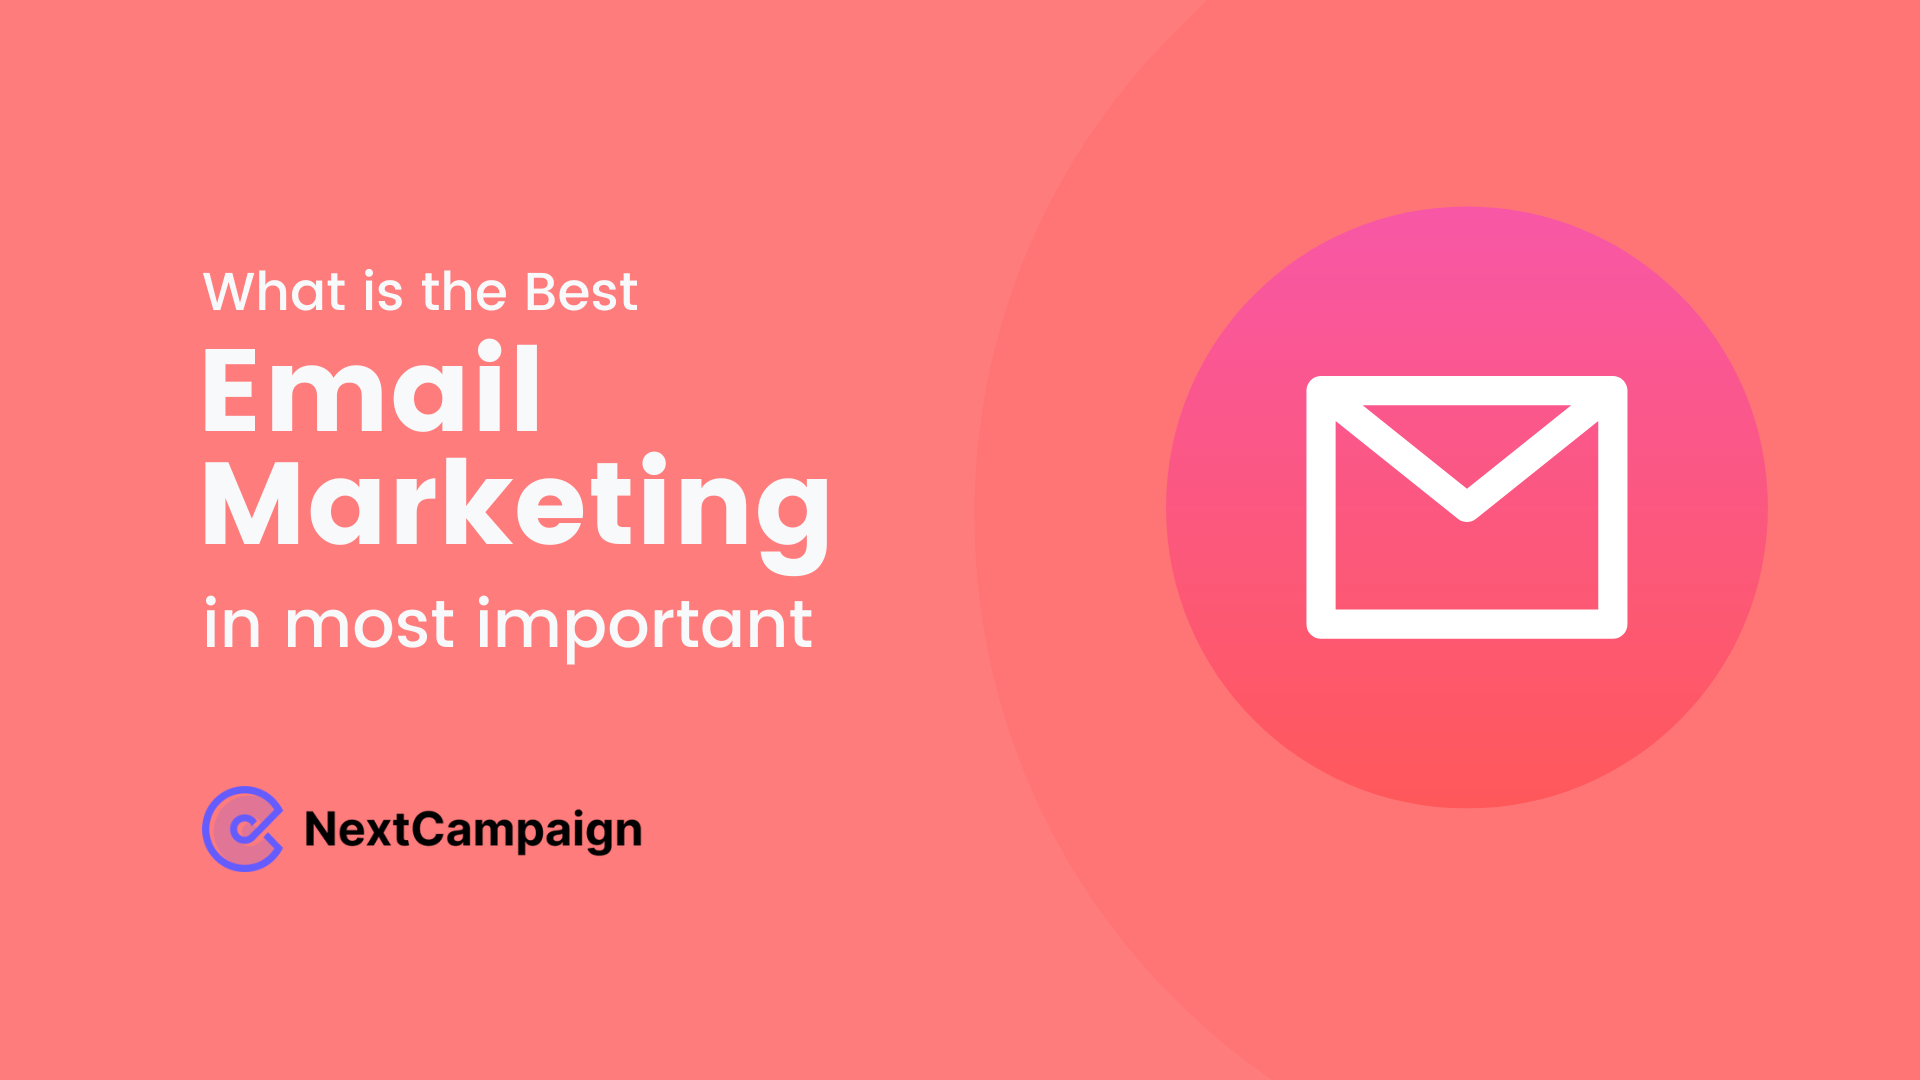 Email Marketing is most important in Online Business